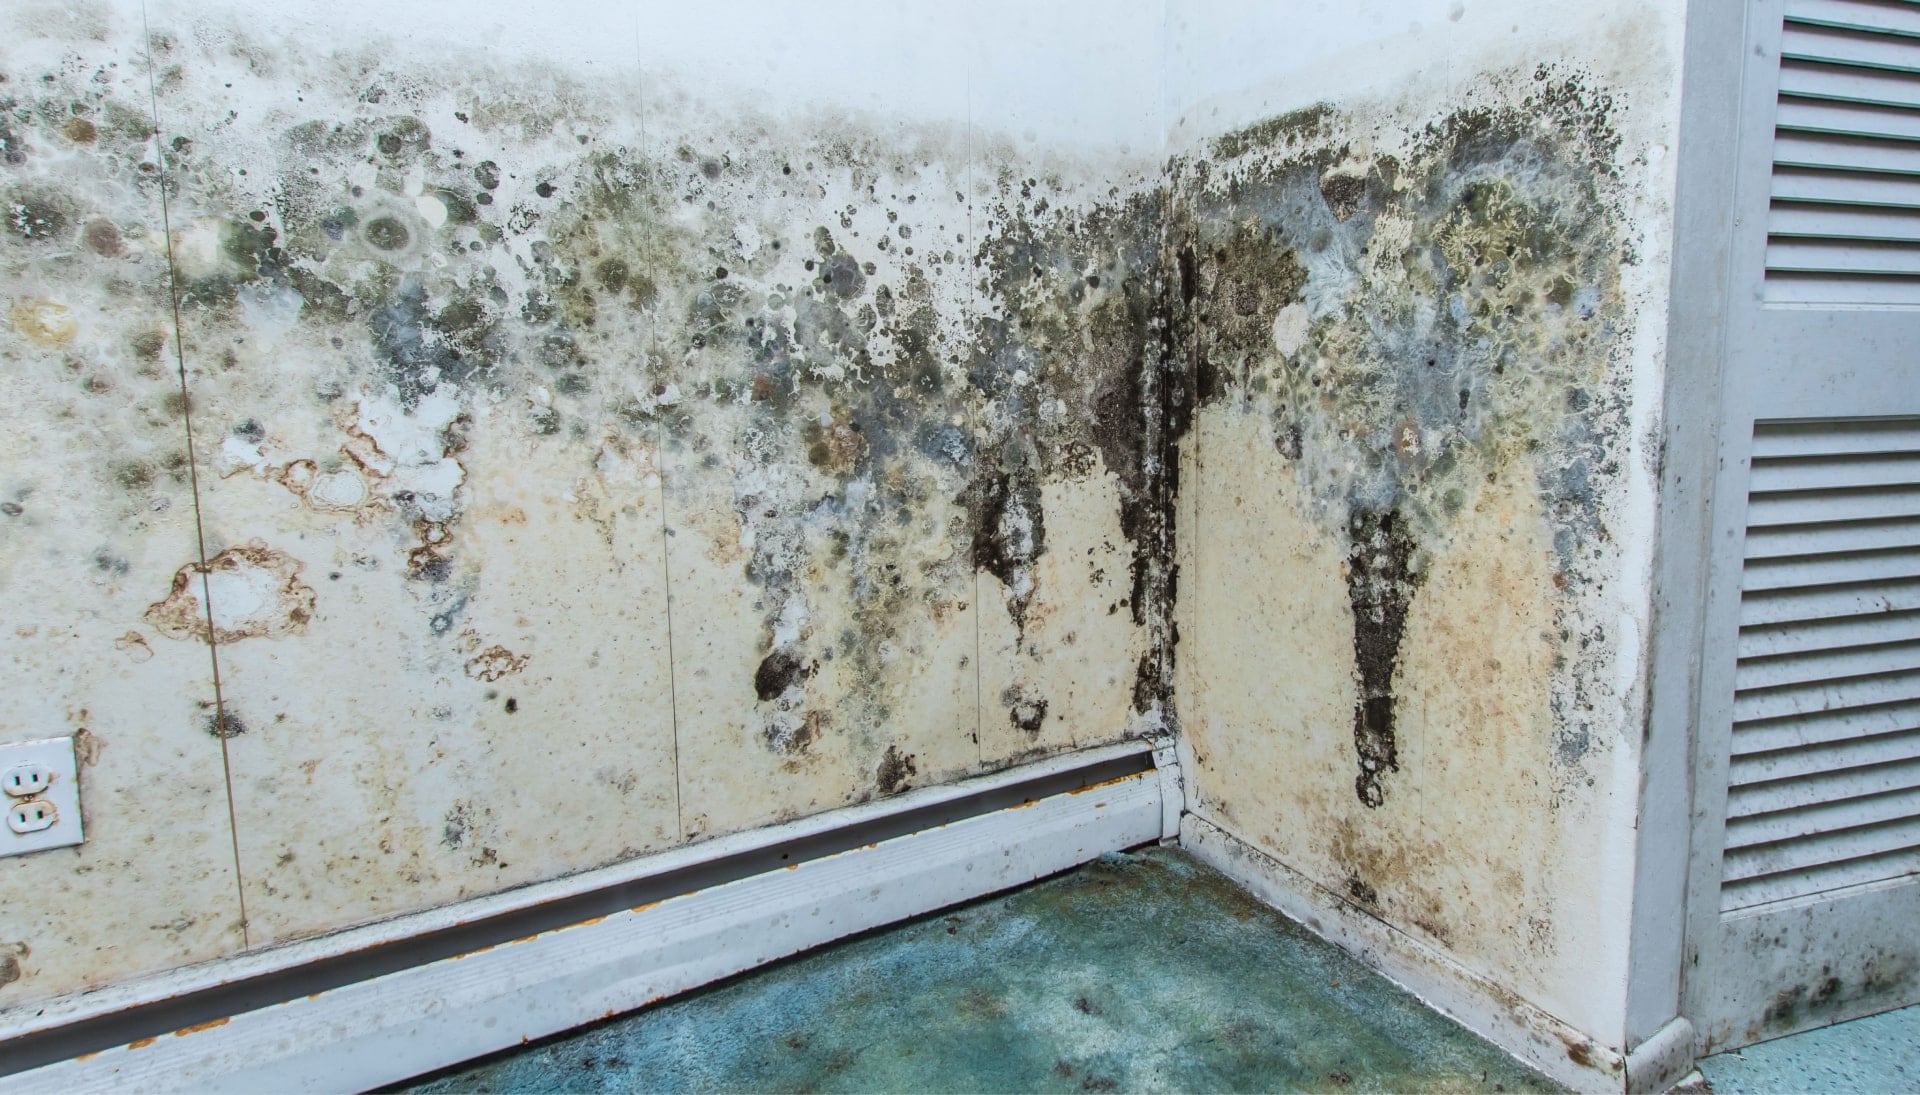 Professional mold removal, odor control, and water damage restoration service in Winston-Salem, NC.